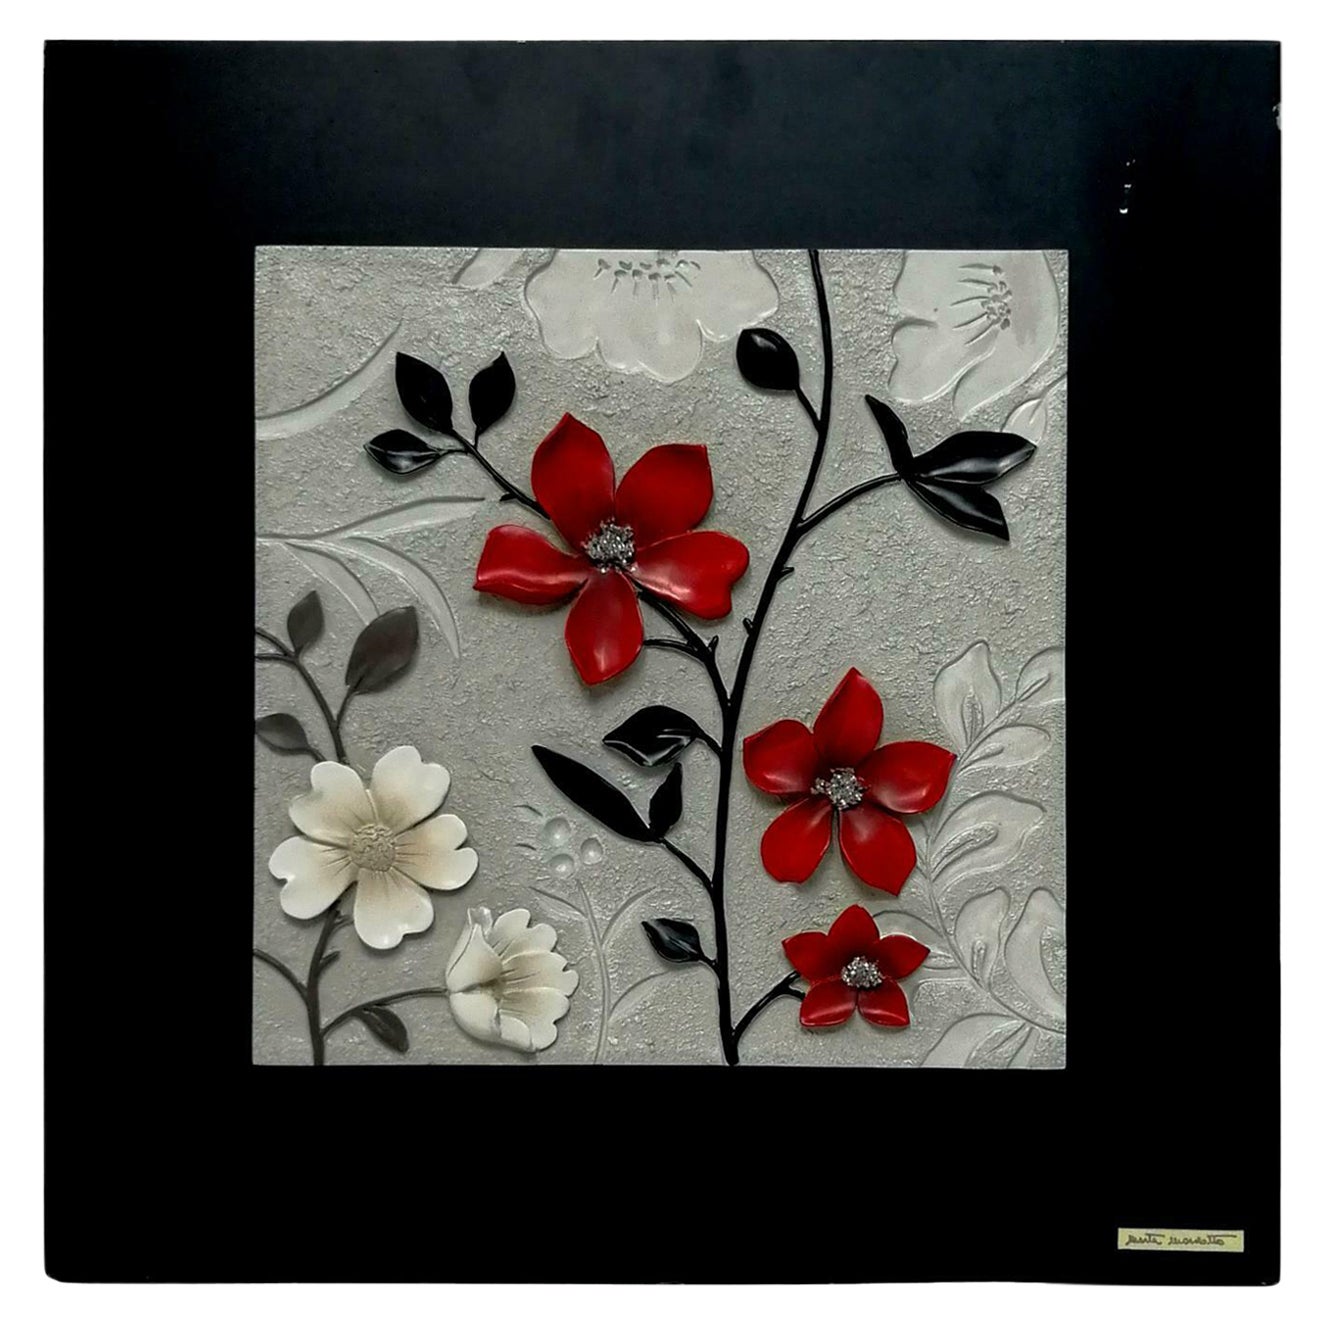 Floral Panel Sculpture Made by Marta Marzotto, 1980s